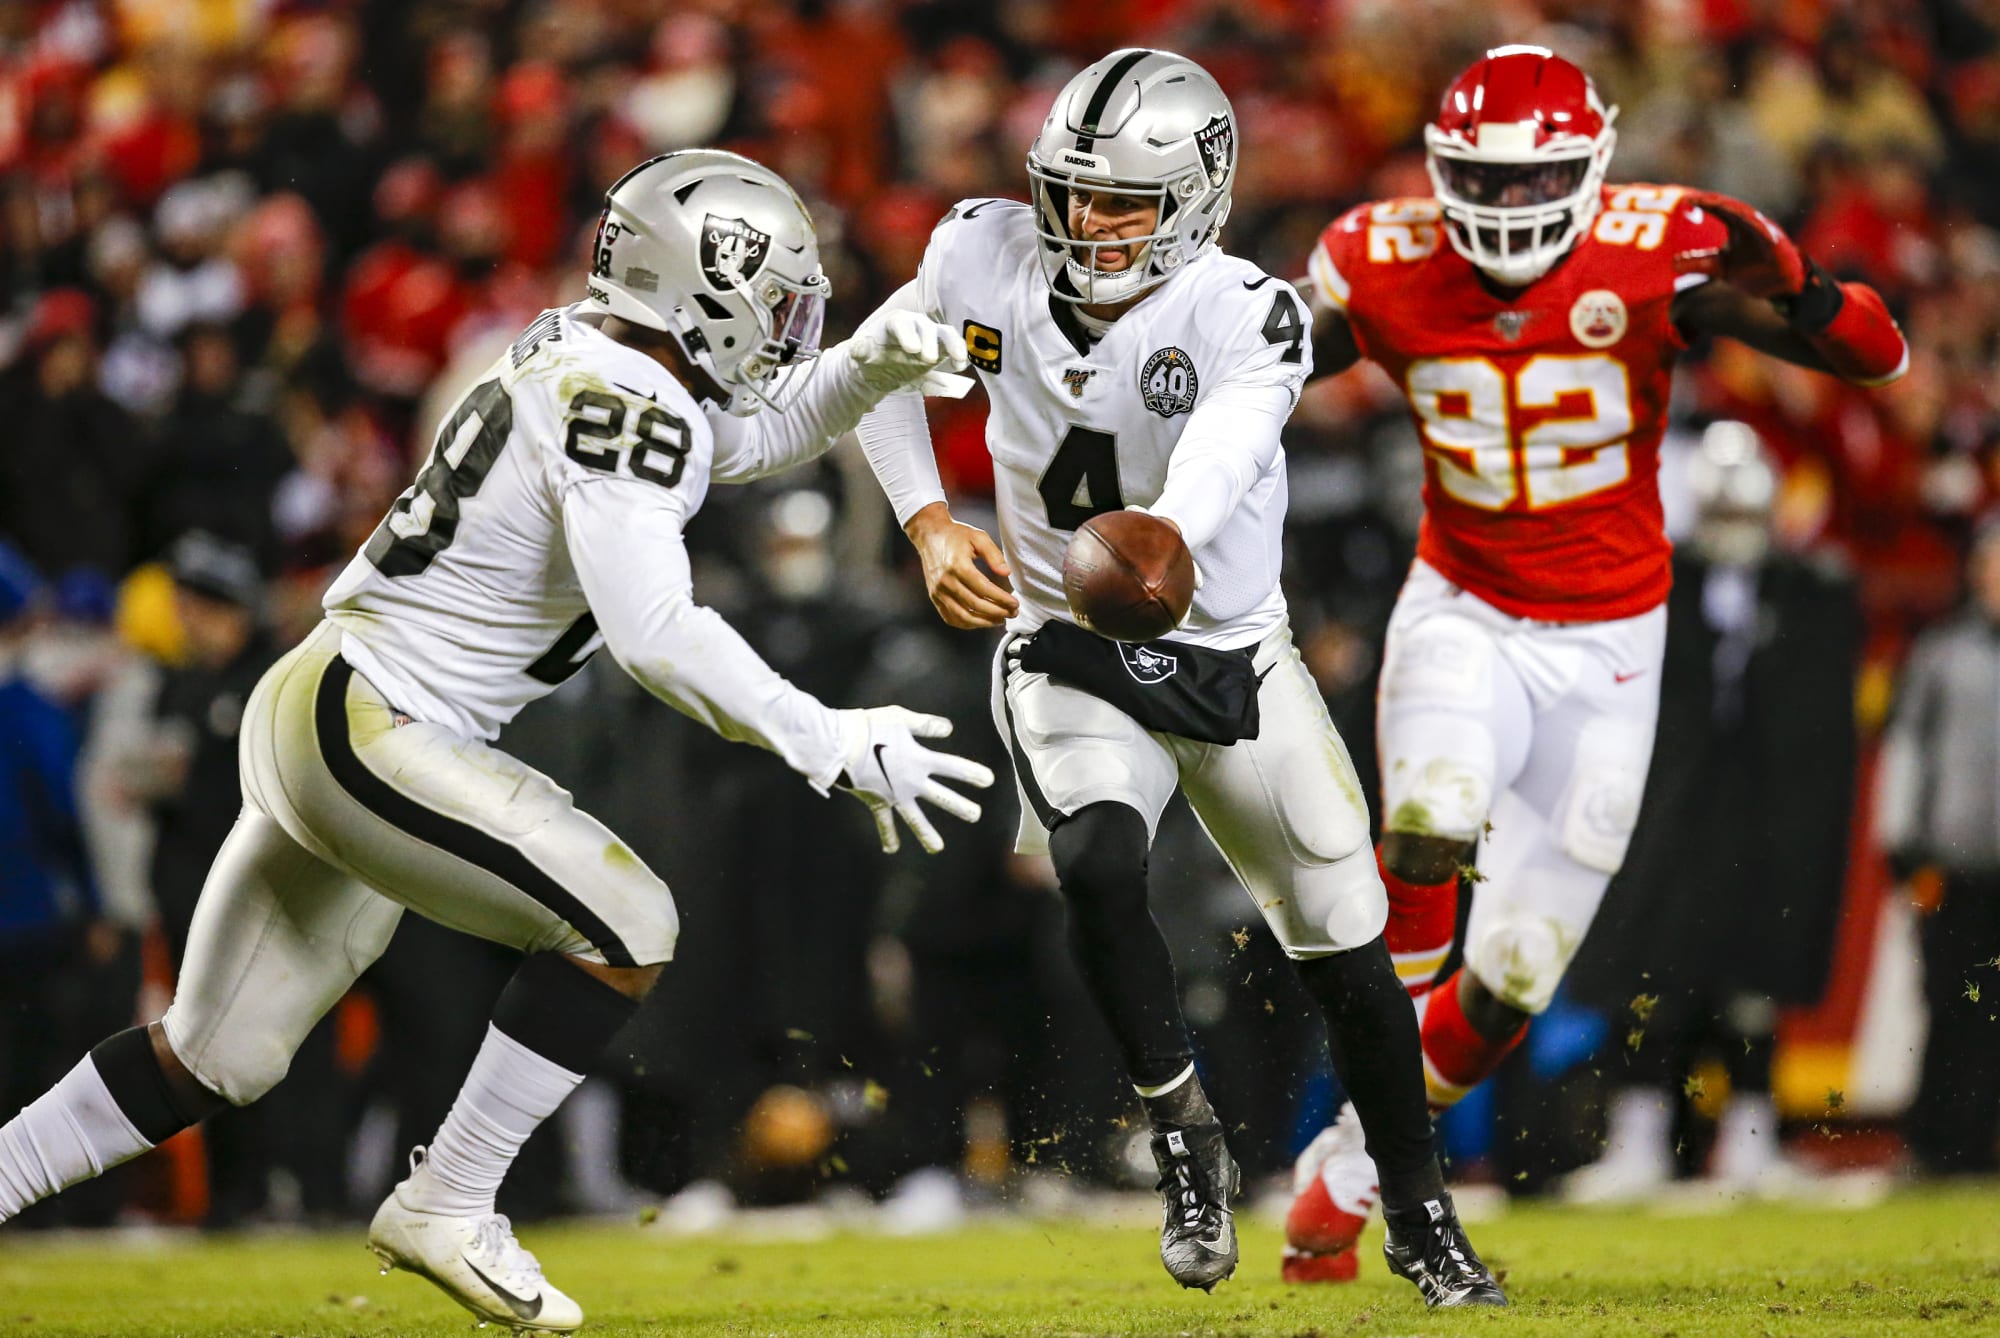 A look at the final stretch for the Oakland Raiders playoff hopes